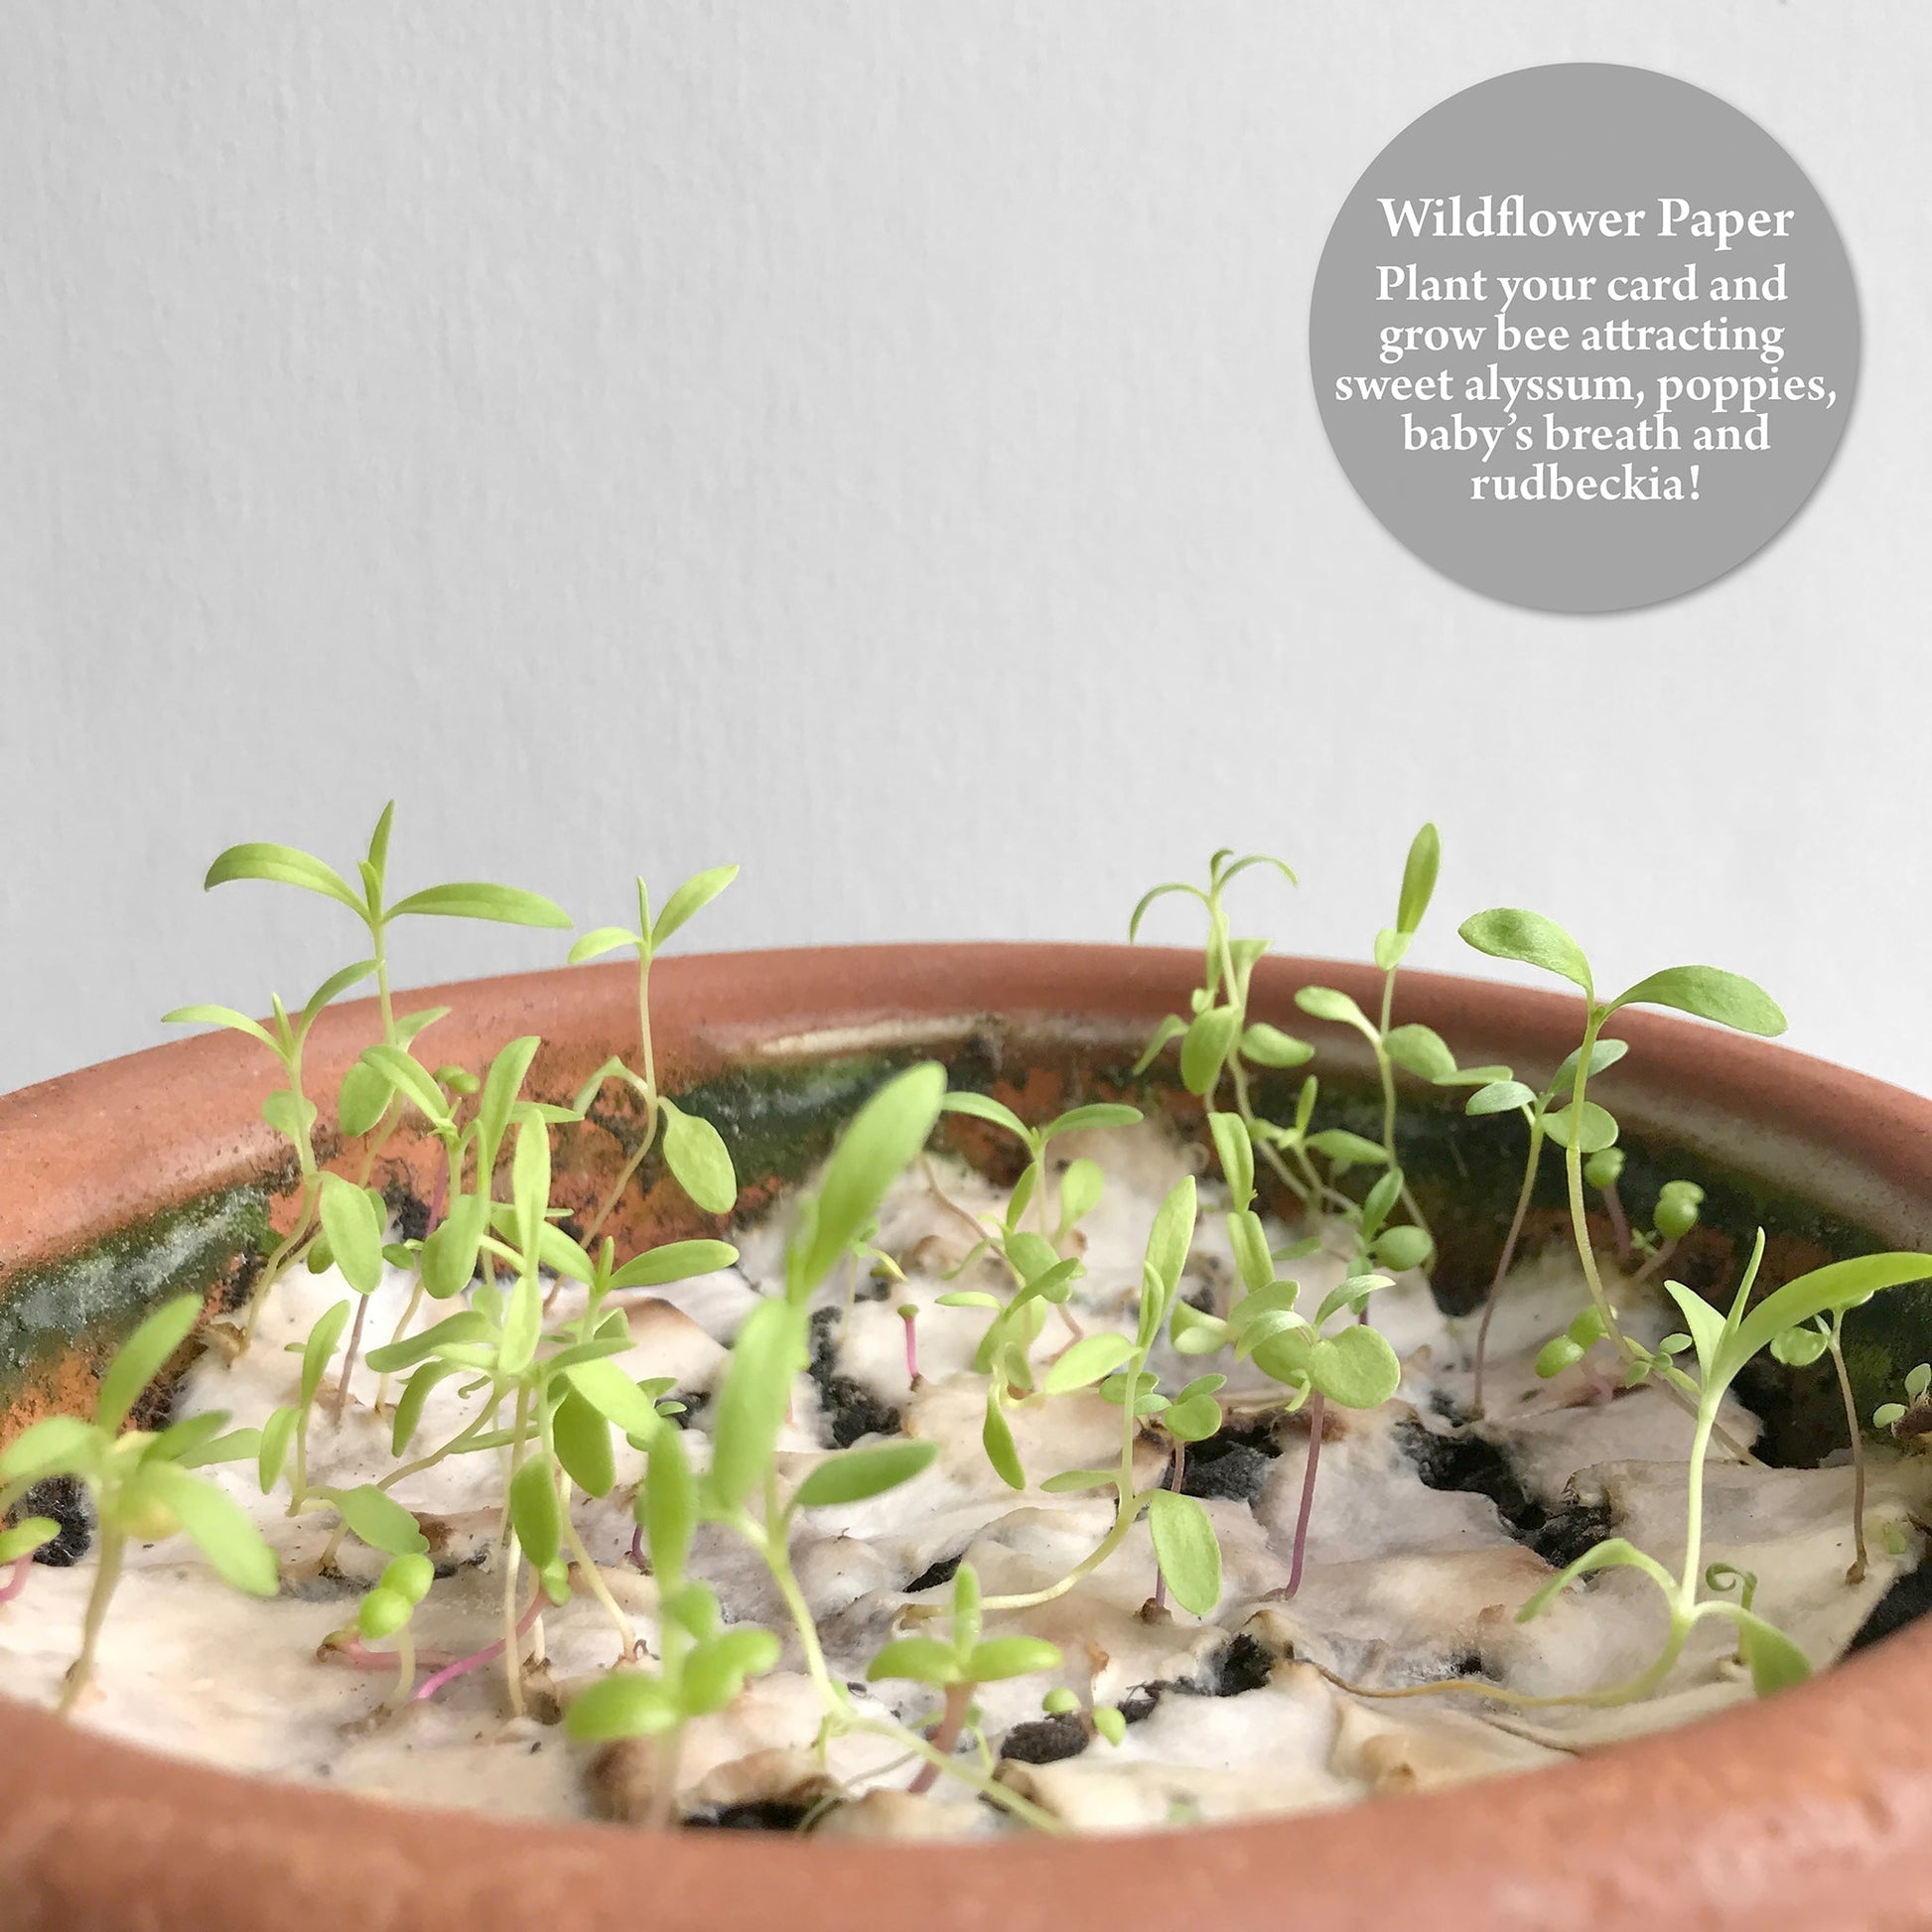 Image shows a Bloom Cards wildflower seed card growing inside a pot. The paper contains a mix of sweet alyssum, poppy, baby's breath and rudbeckia seeds so when your recipient has finished with their card they can plant it and grow bee friendly flowers.